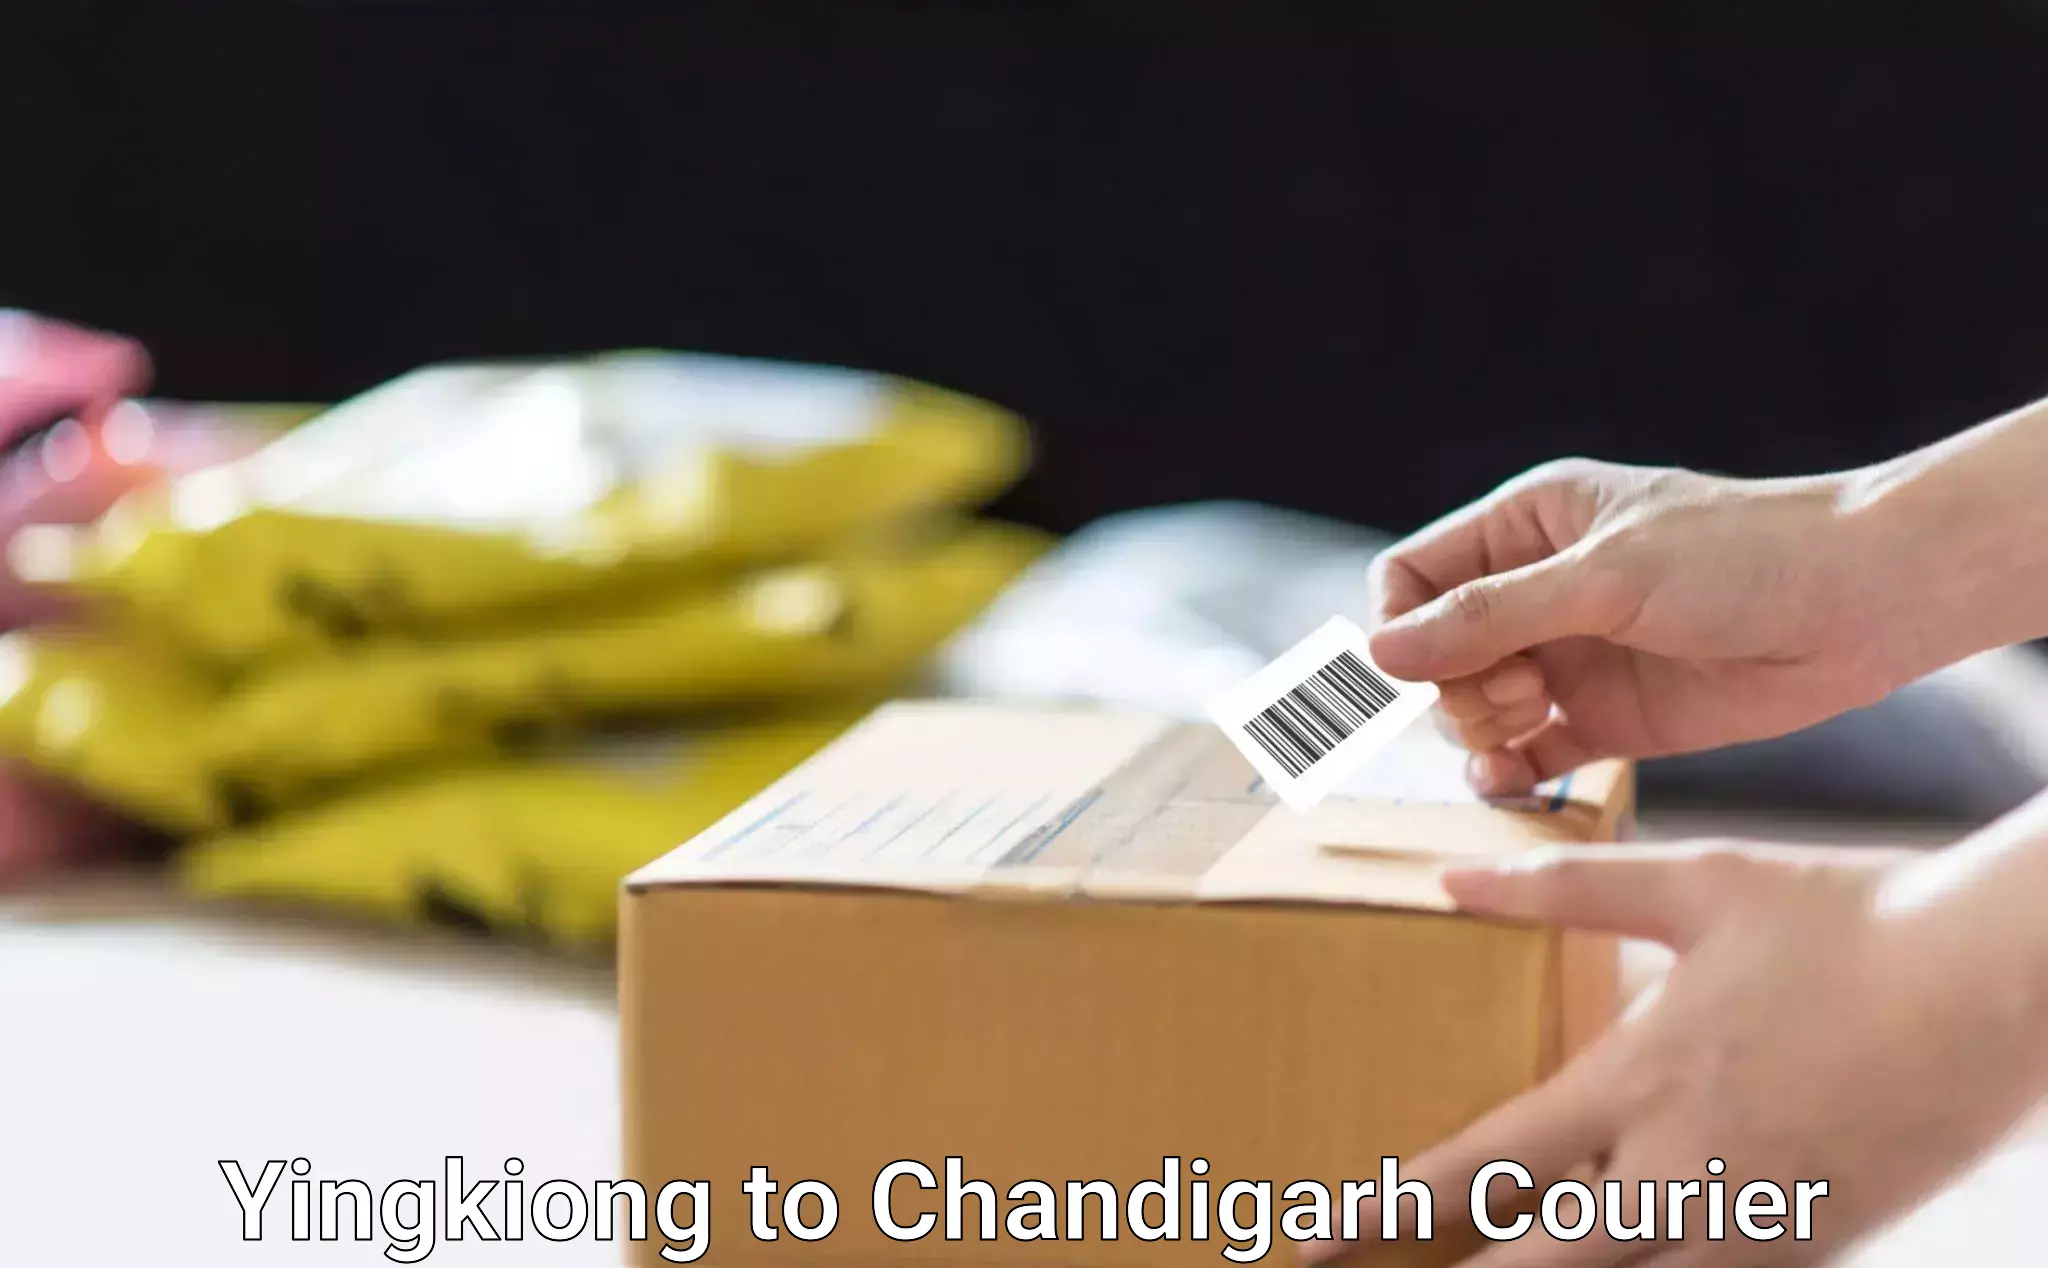 On-call courier service Yingkiong to Panjab University Chandigarh